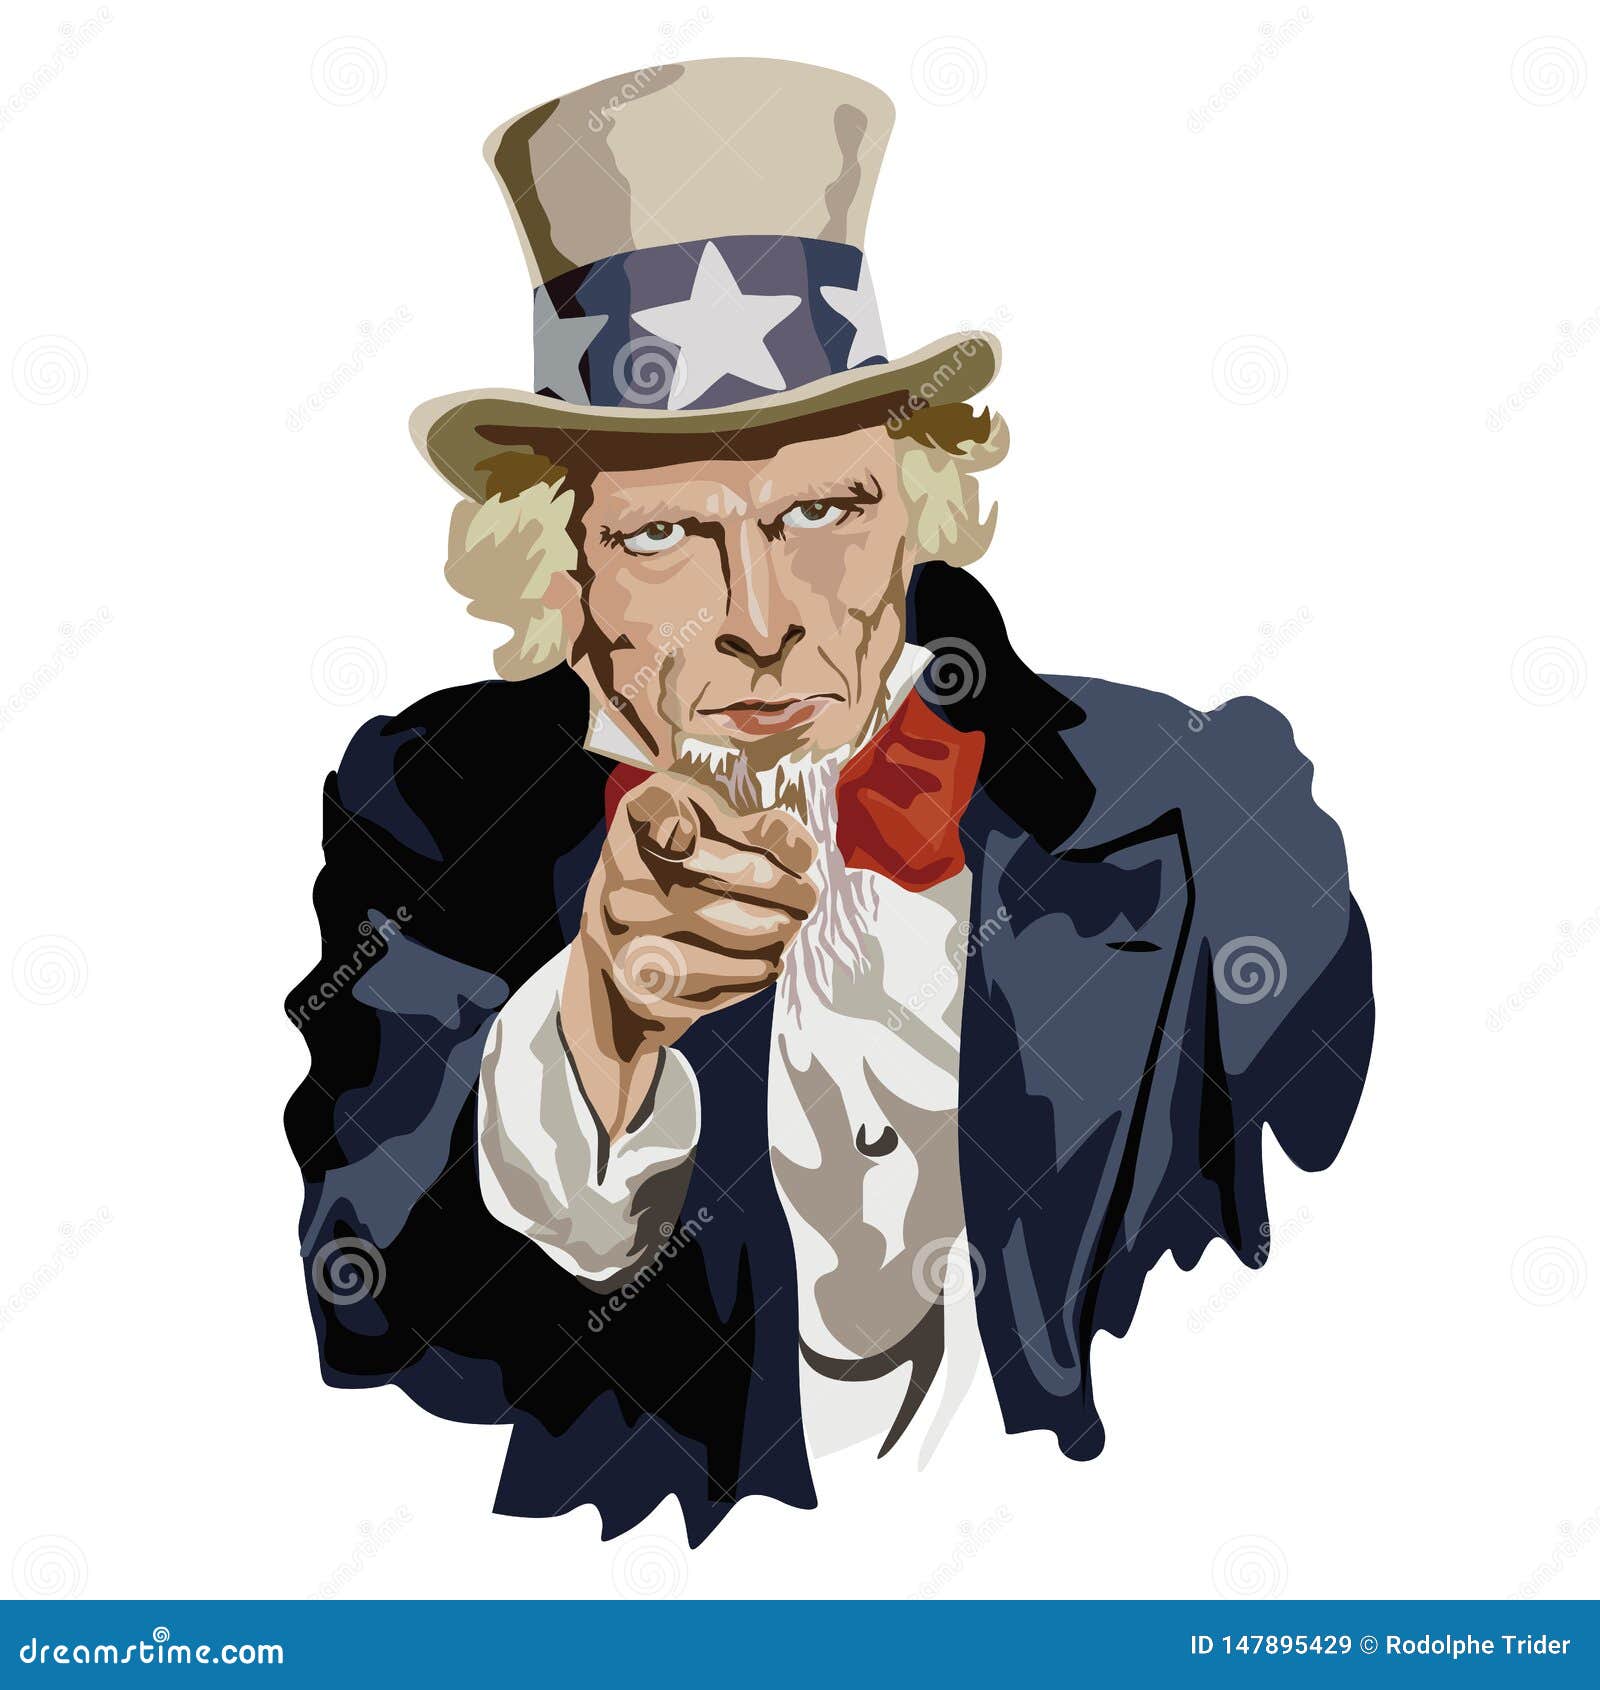 the famous portrait of uncle sam, historical figure and american emblem.